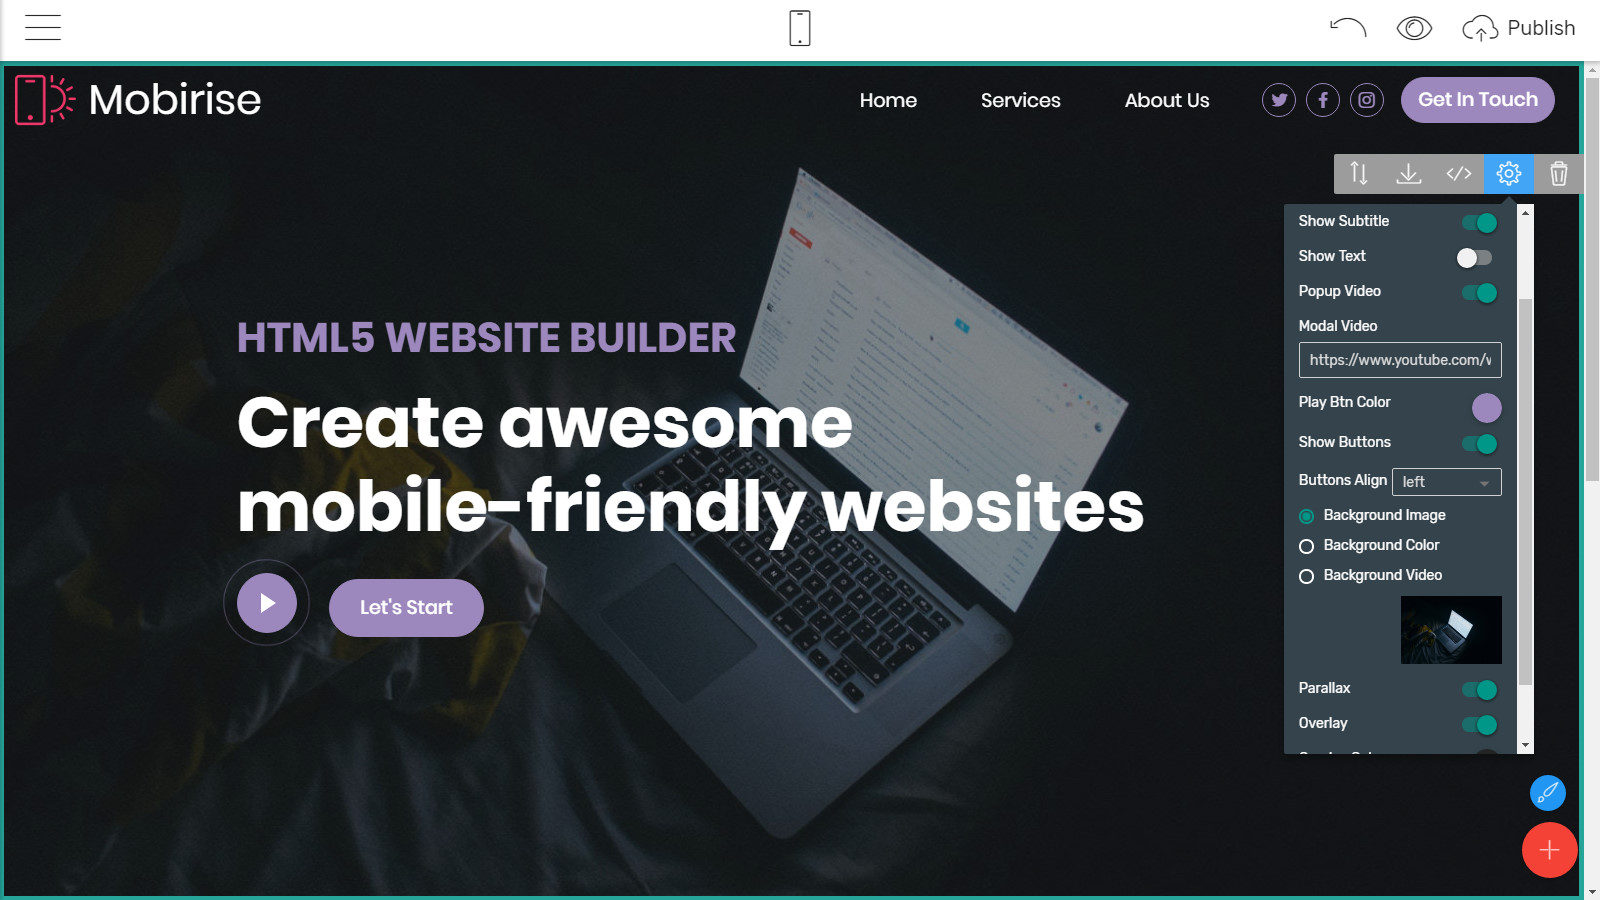 responsive site layouts